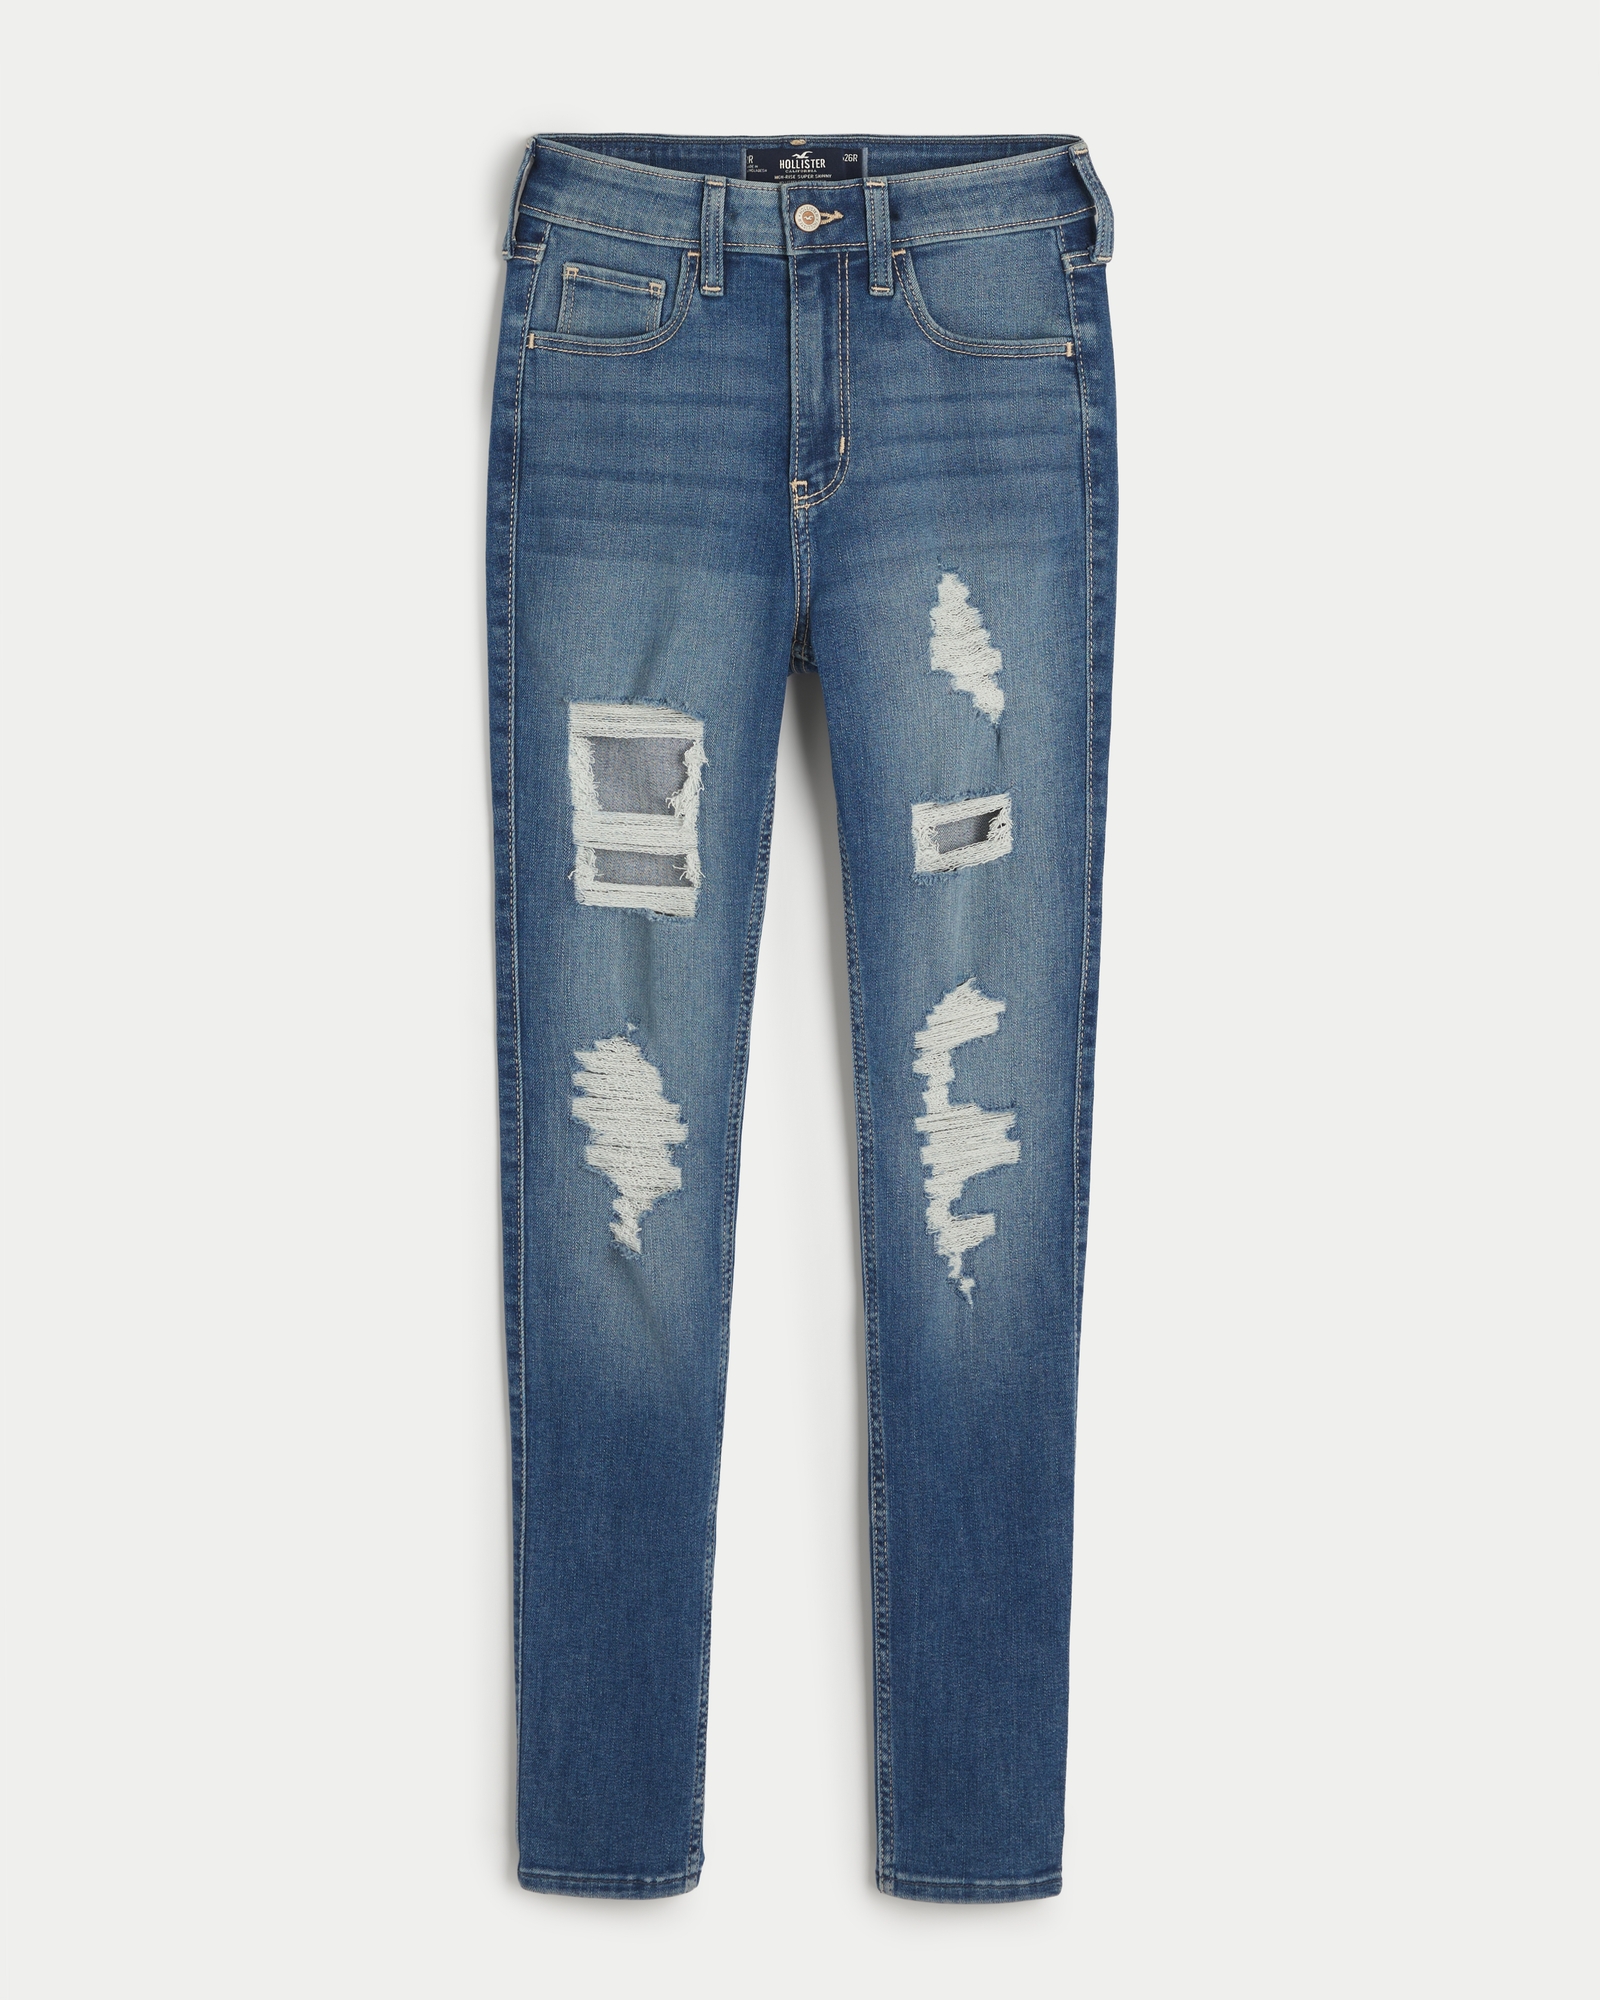 https://img.hollisterco.com/is/image/anf/KIC_355-2209-0688-279_prod1.jpg?policy=product-extra-large